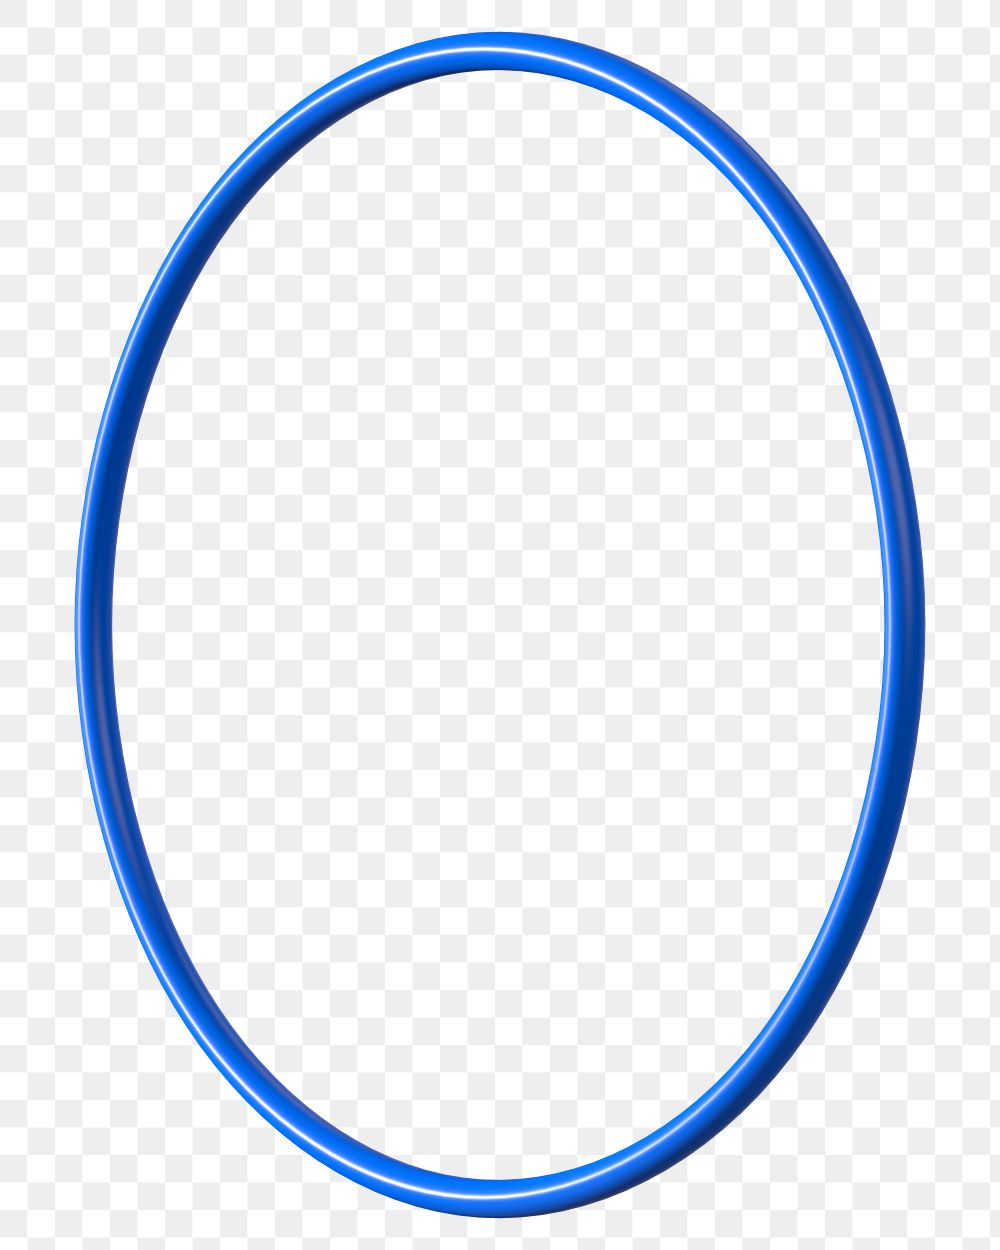 3D blue ring png, oval shape, geometric clipart, transparent background